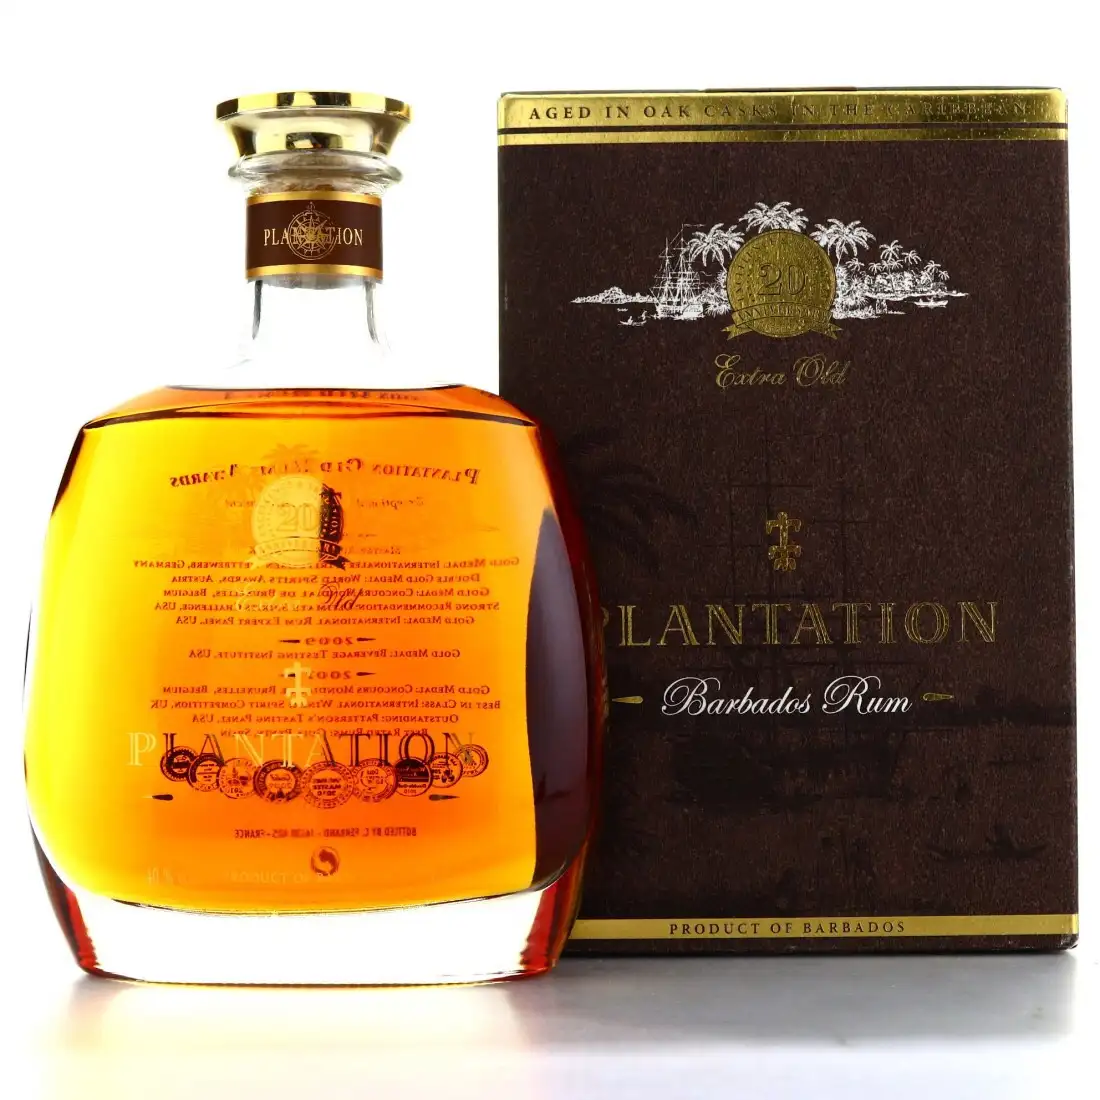 Image of the front of the bottle of the rum Plantation Extra Old XO 20th Anniversary (Vintage)